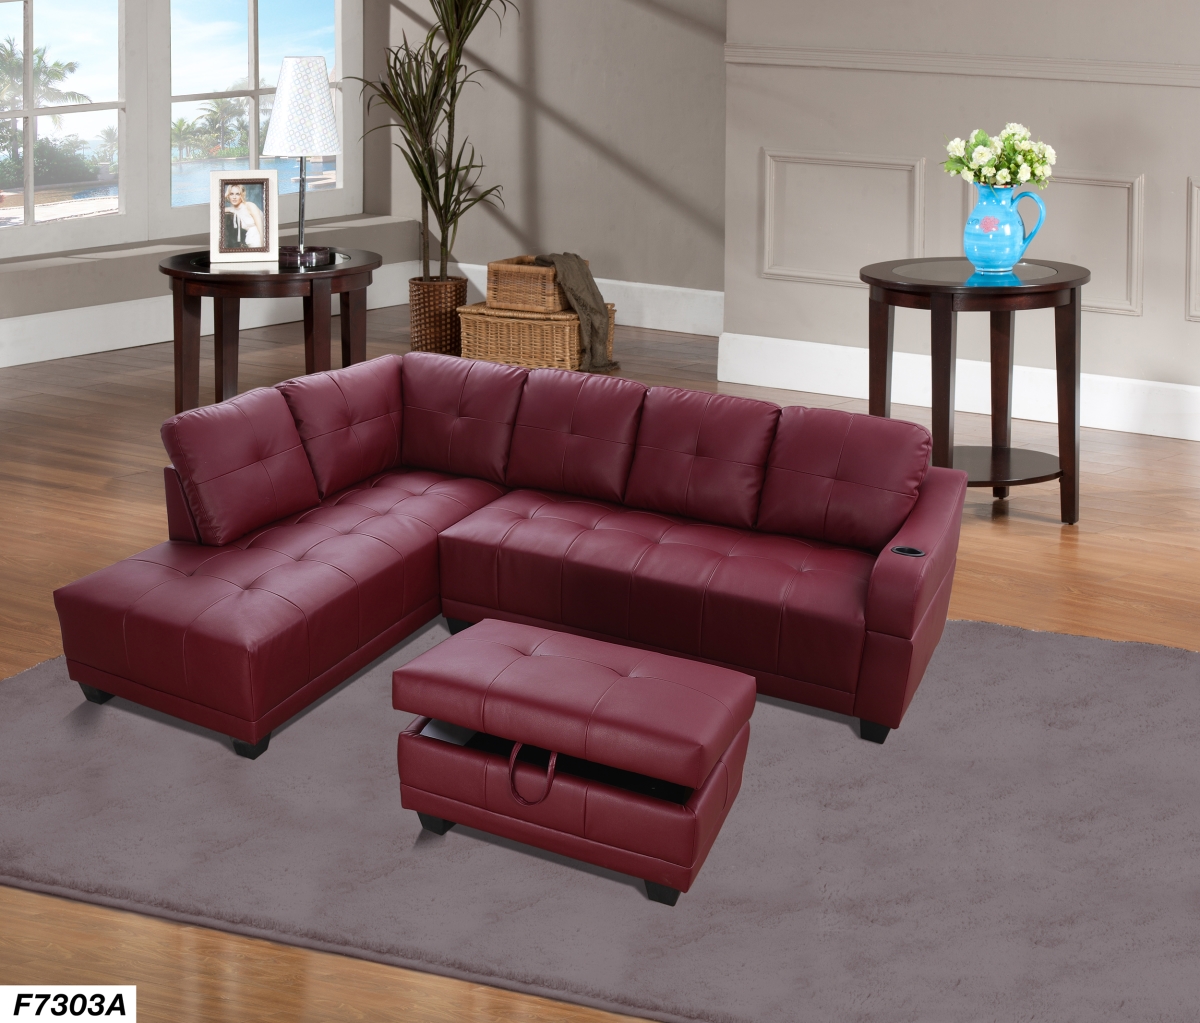 Lifestyle LS7303A Left Facing Sectional Sofa Set - Faux Leather, Red - 3 Piece